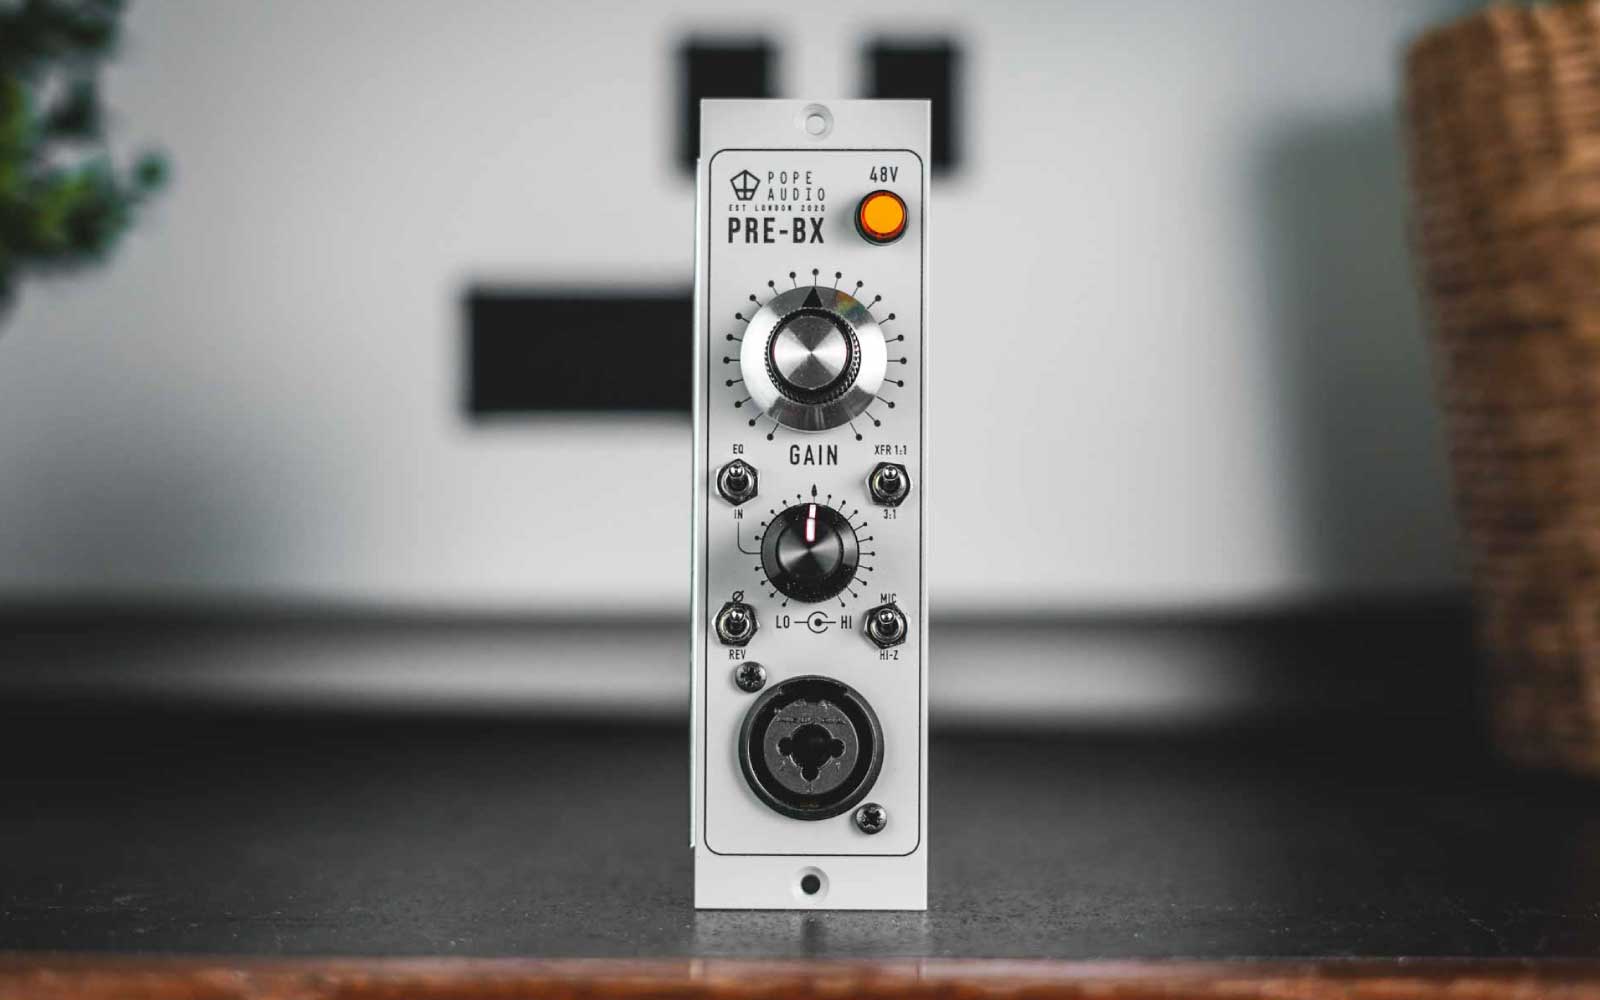 Pope Audio PRE-BX microphone preamp 500 series